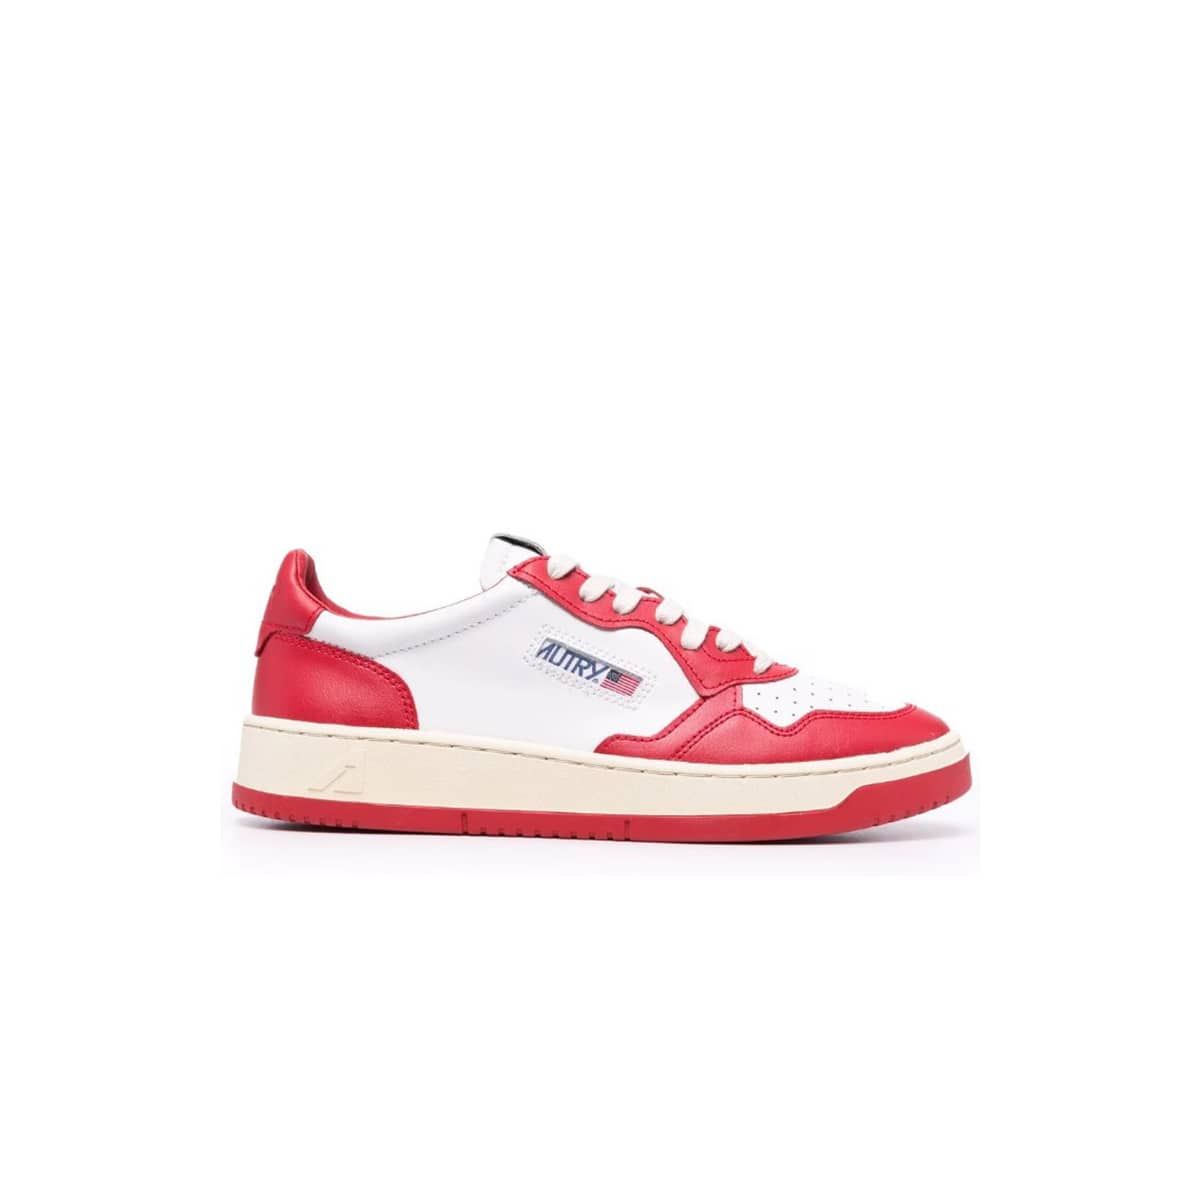 01 Low Top Sneakers In Red Leather